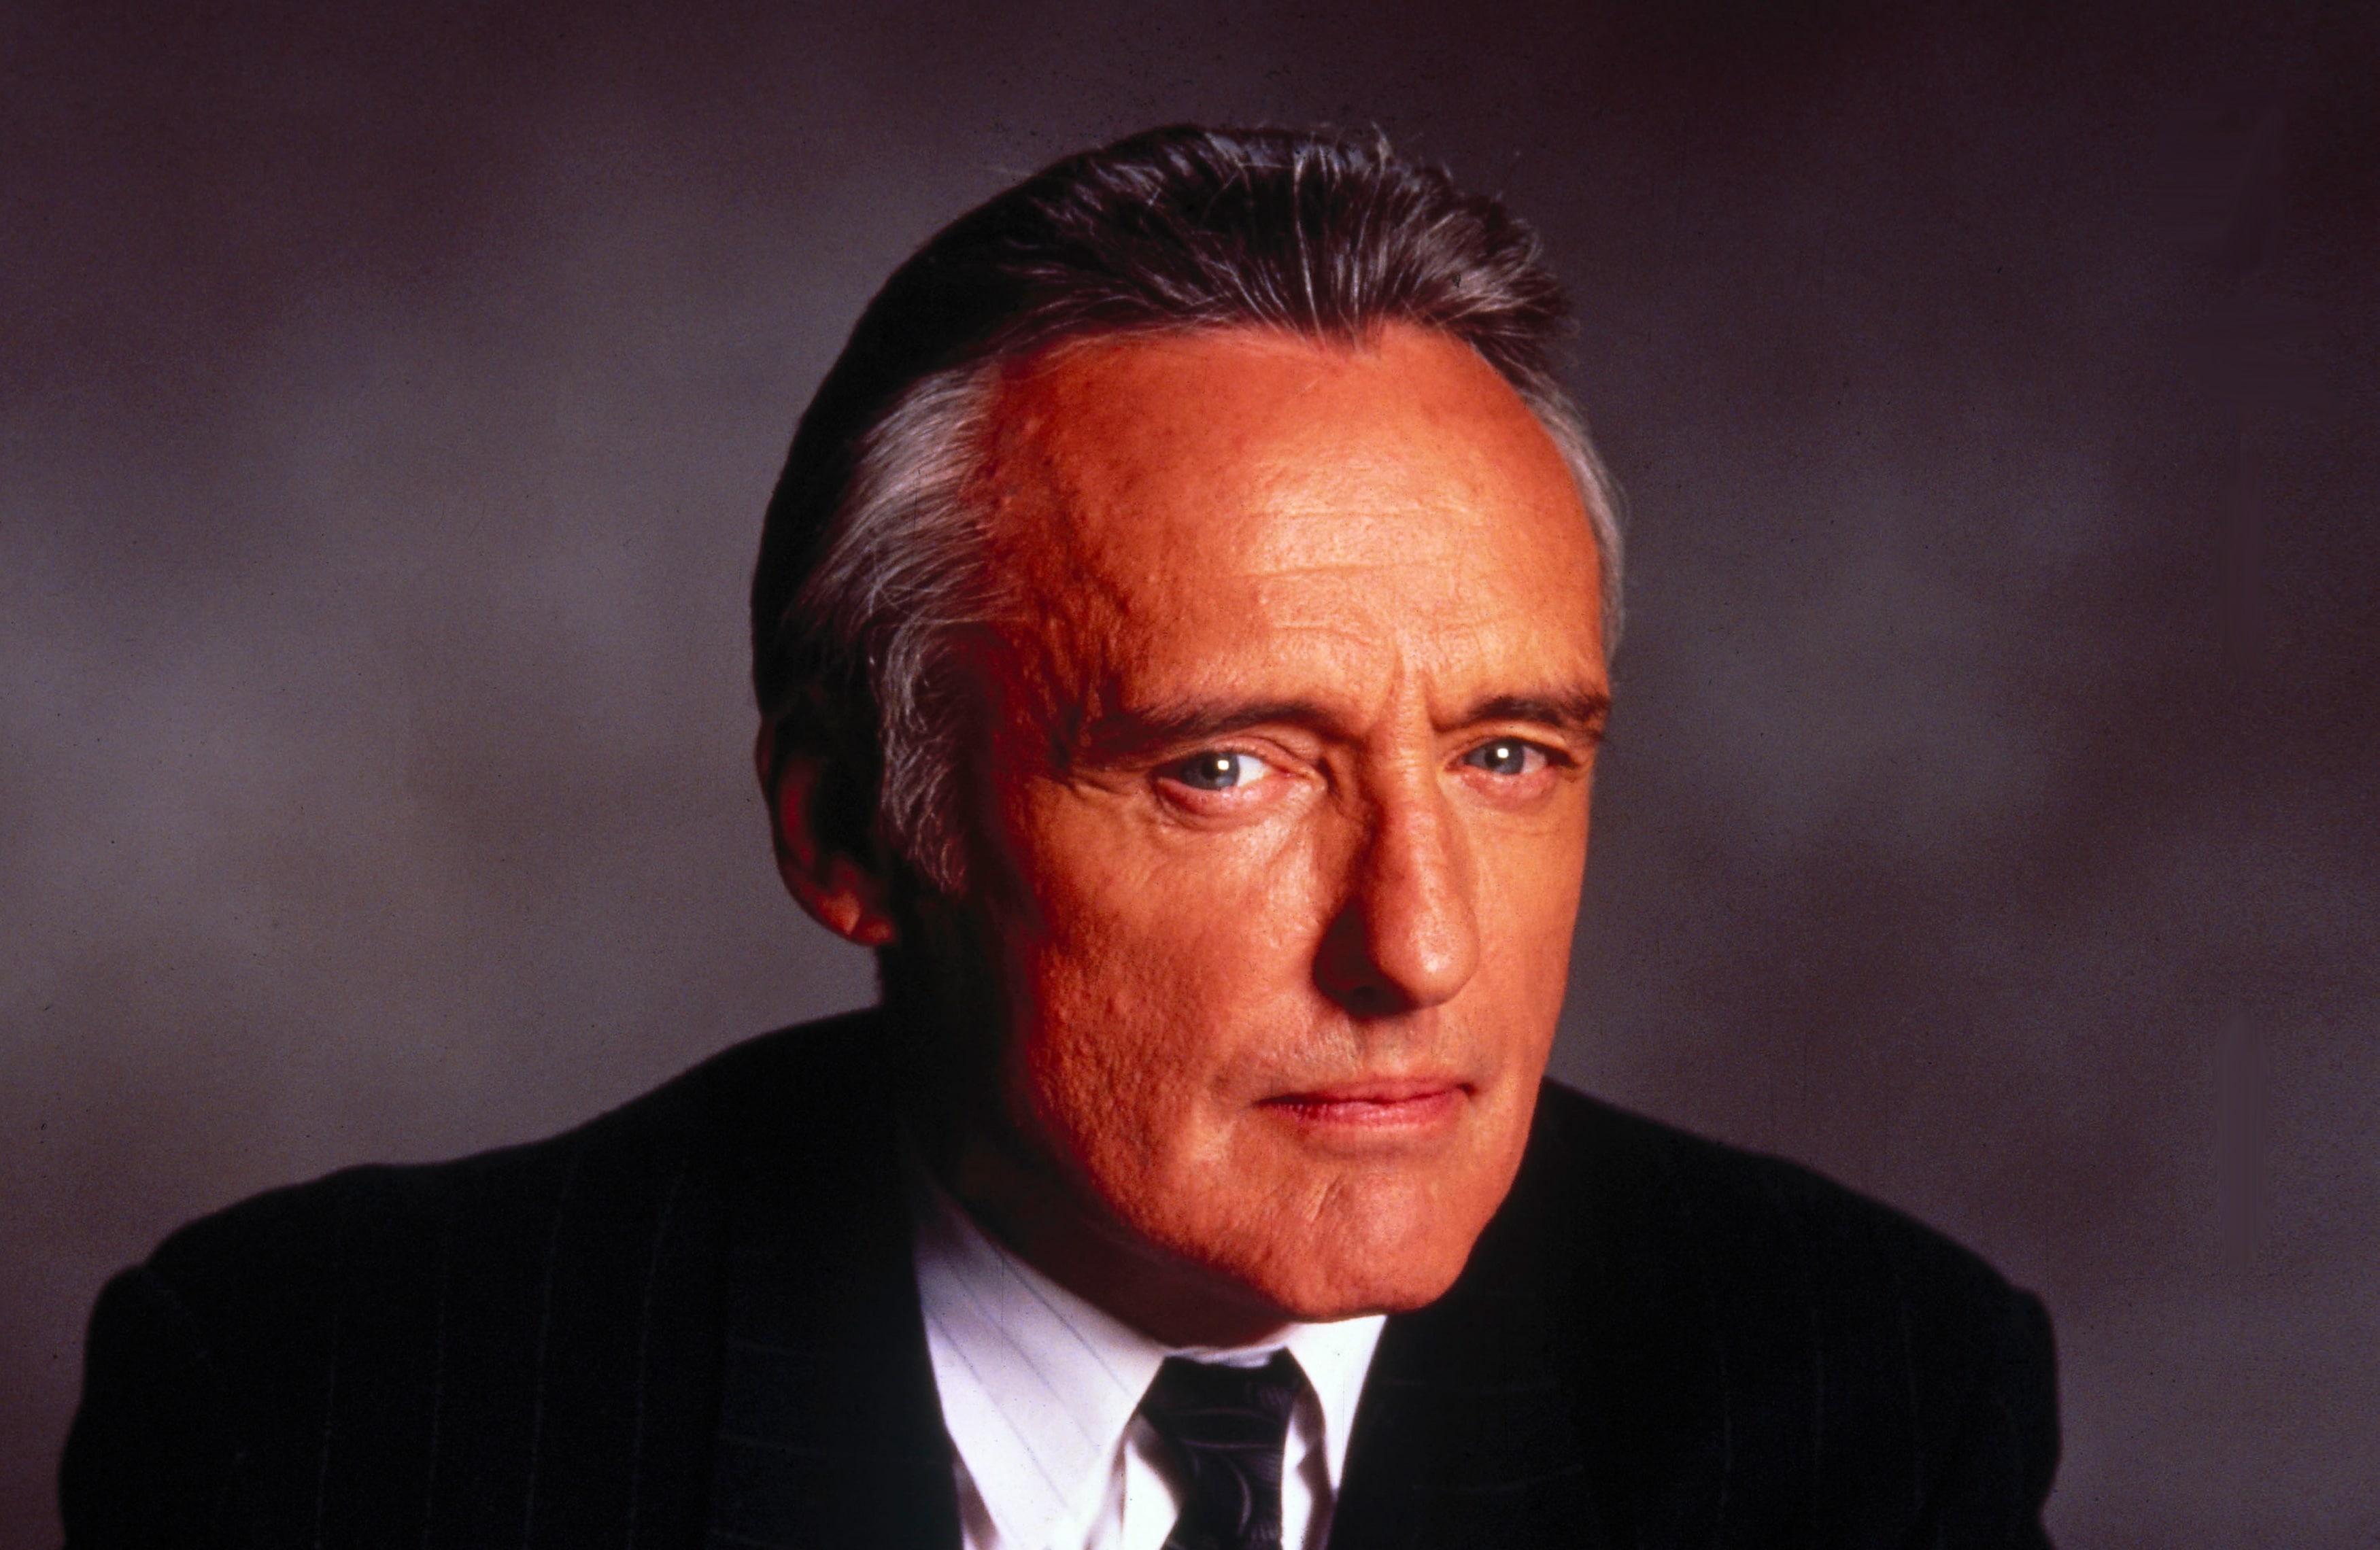 Dennis Hopper Net Worth - $40 Million, Interesting Facts About His Life And Much More